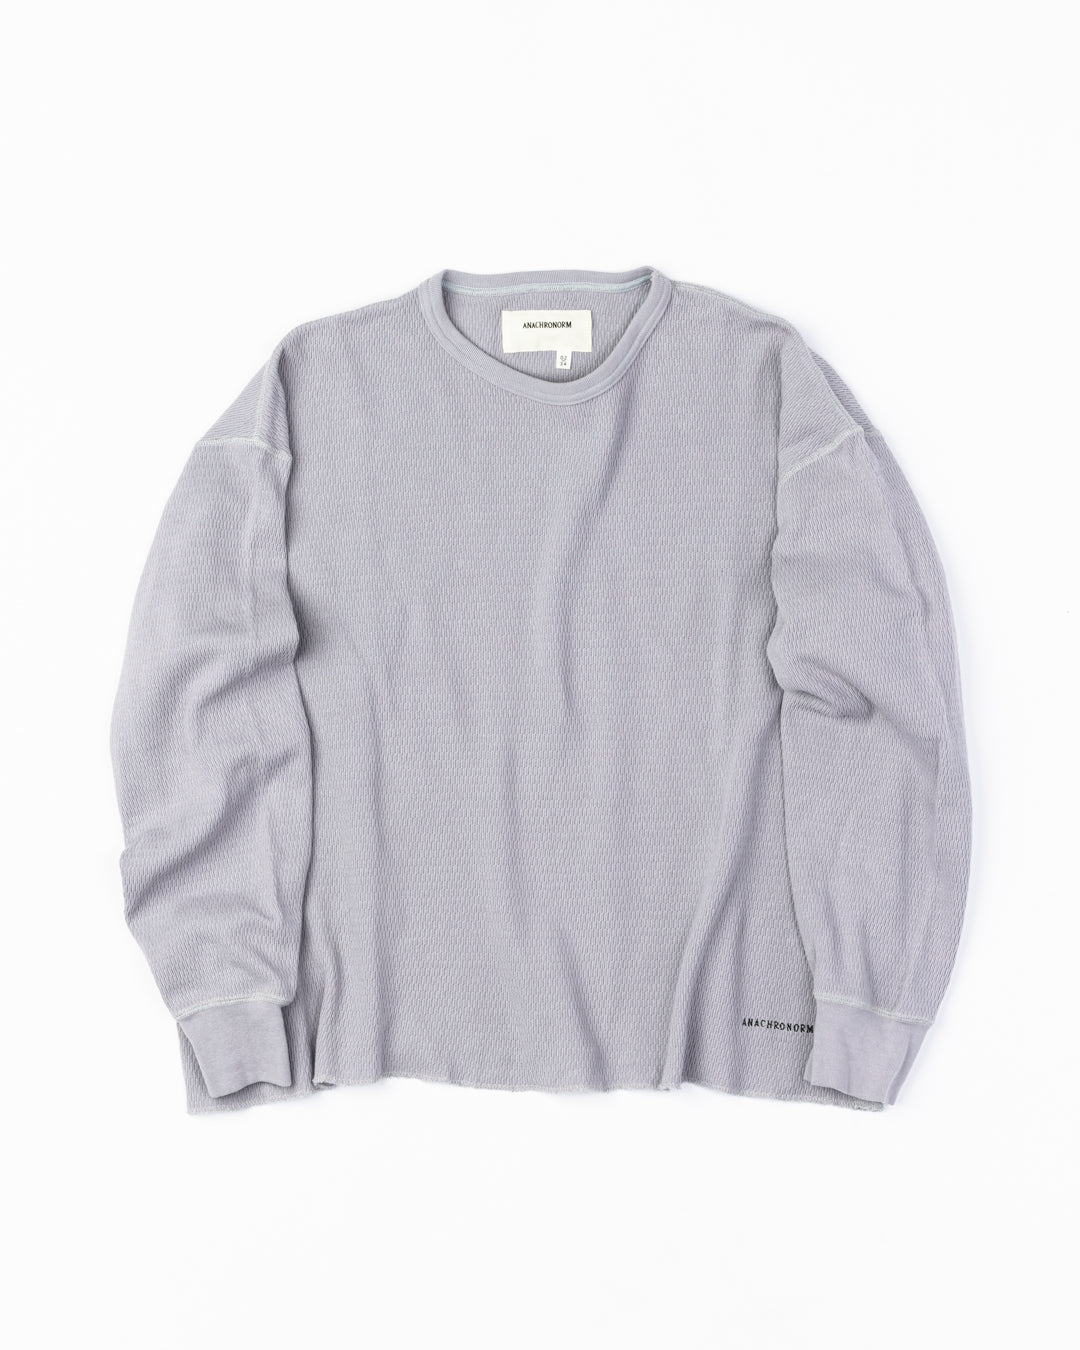 AN250 HEAVY THERMAL L/S T-S HEATHER GRAY